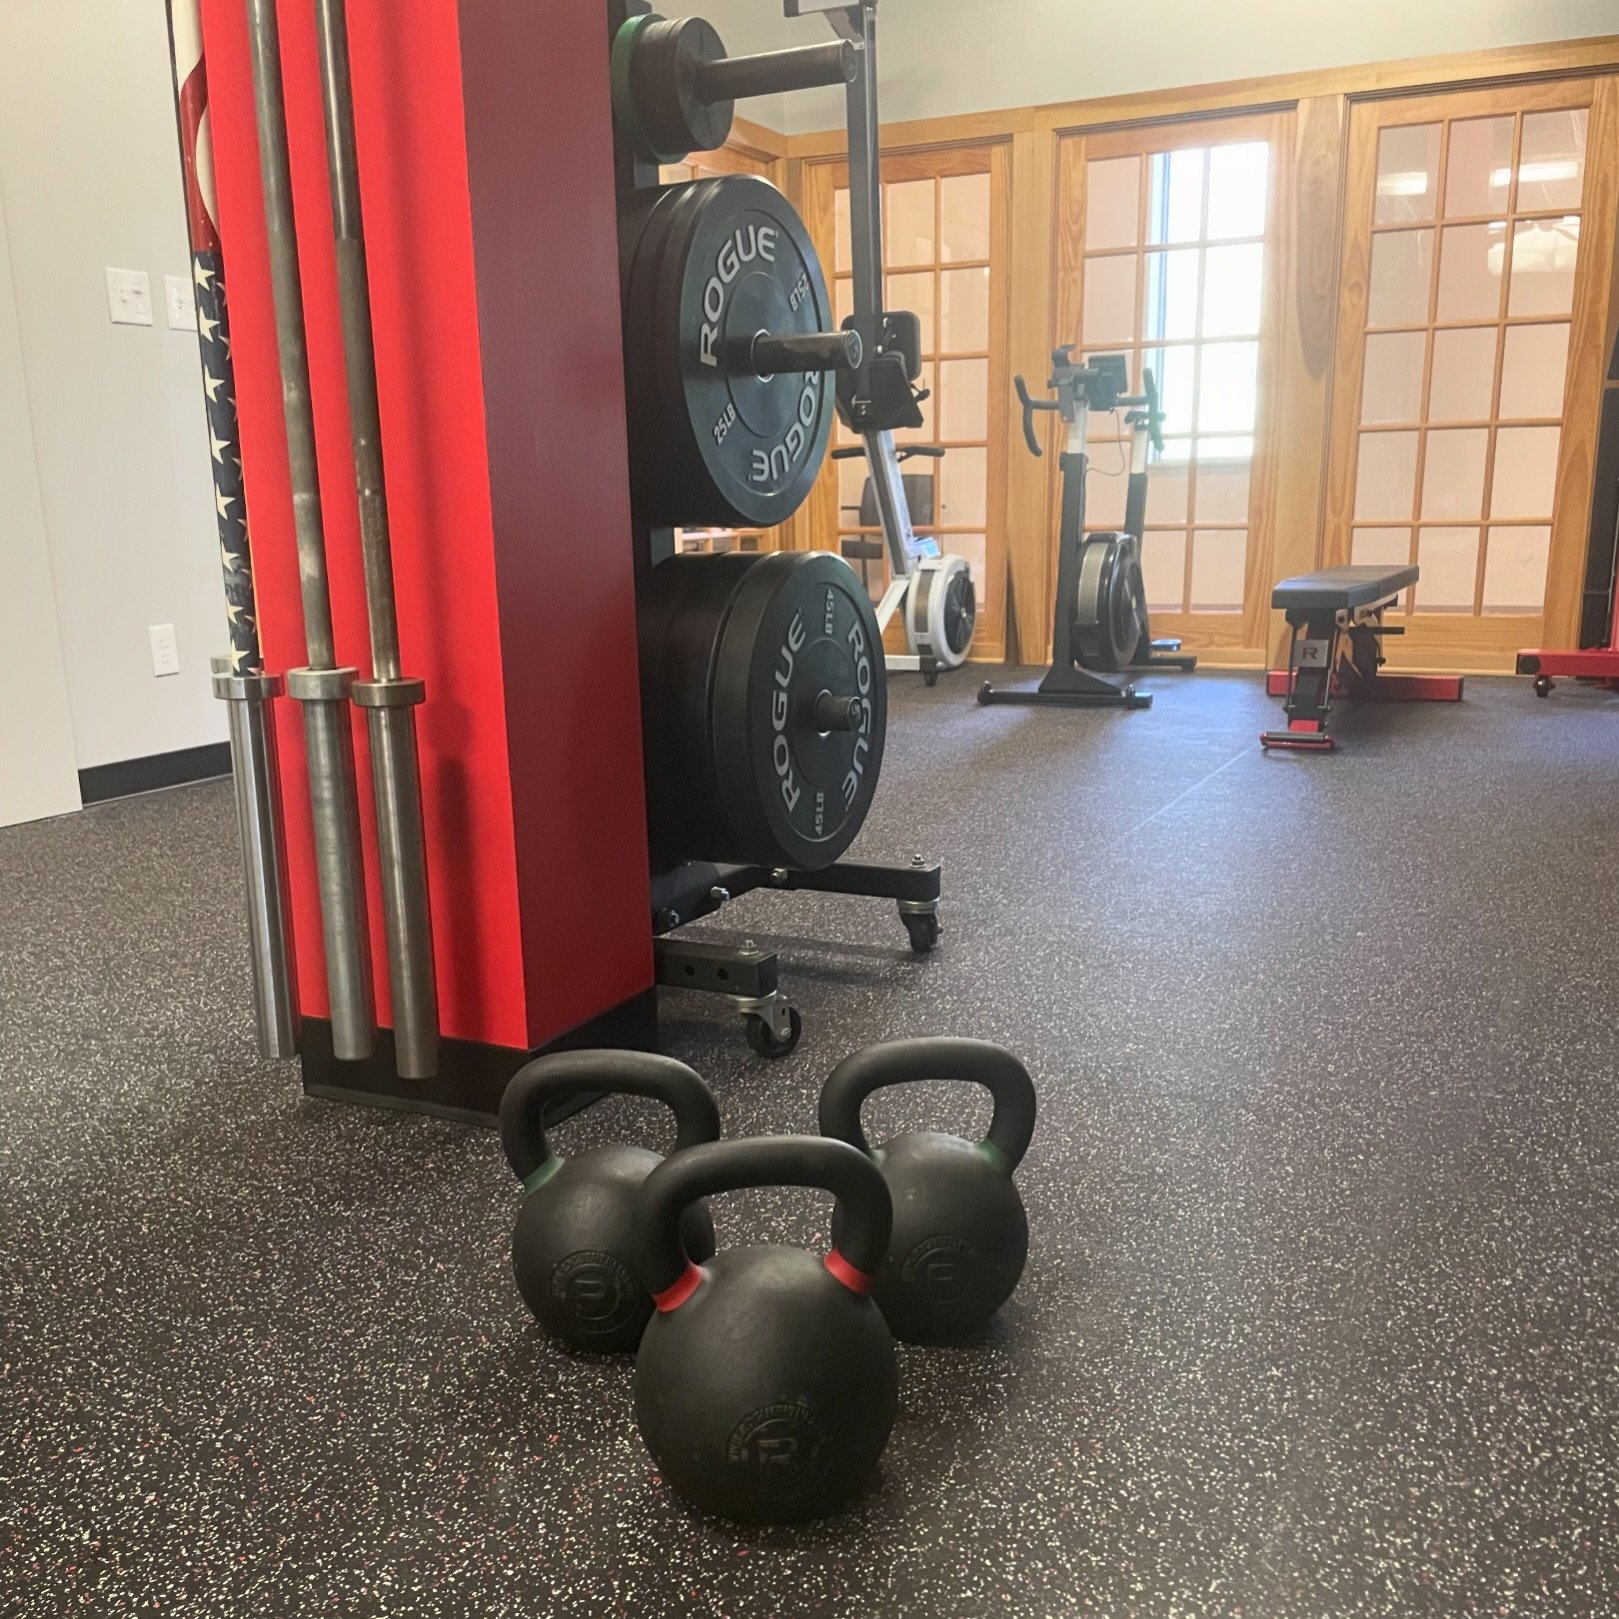 Heavy squats, KB thrusters, and Turkish Get Ups (because what else 😏) to break in the new office with its first workout 🙌🏼🙌🏼🙌🏼

What does your PT clinic look like? 

Does it actually have the tools to make you stronger and help you move better